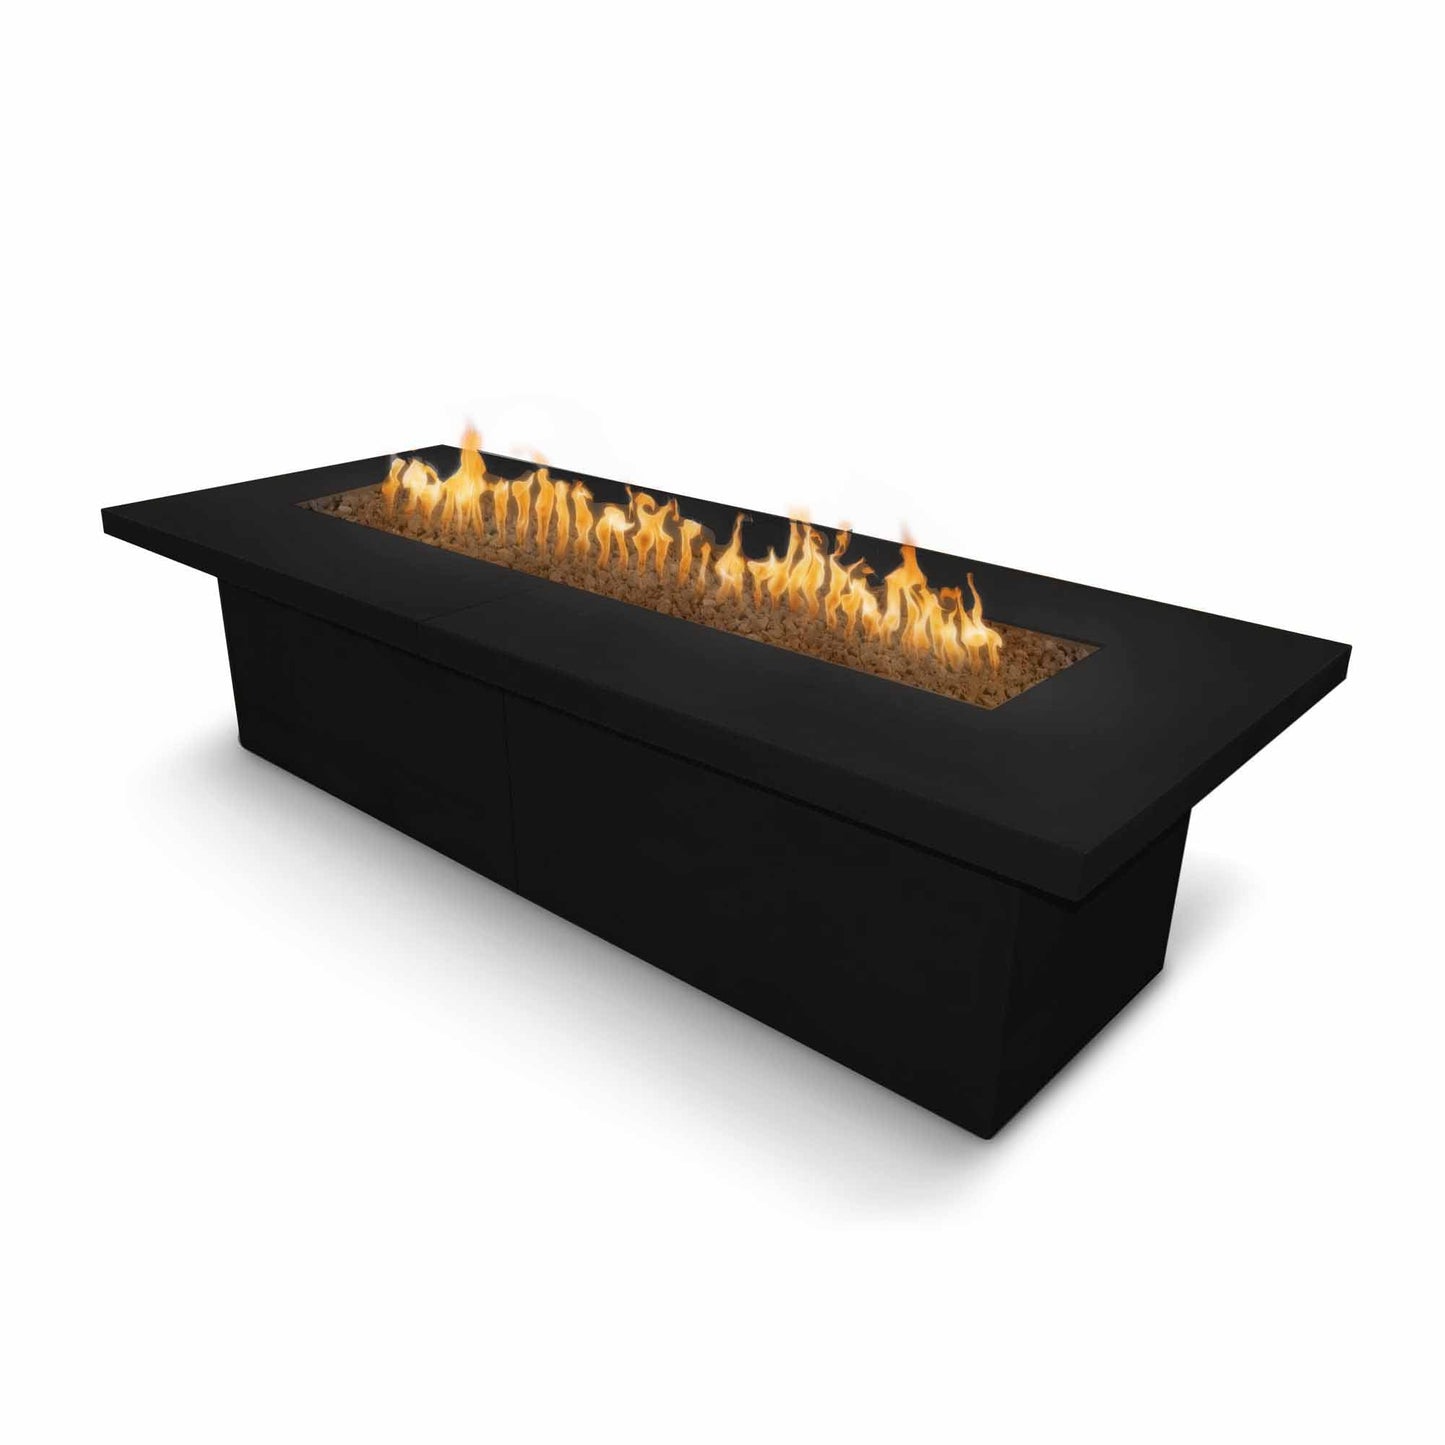 The Outdoor Plus Rectangular Newport 144" Hammered Copper Natural Gas Fire Pit with 12V Electronic Ignition